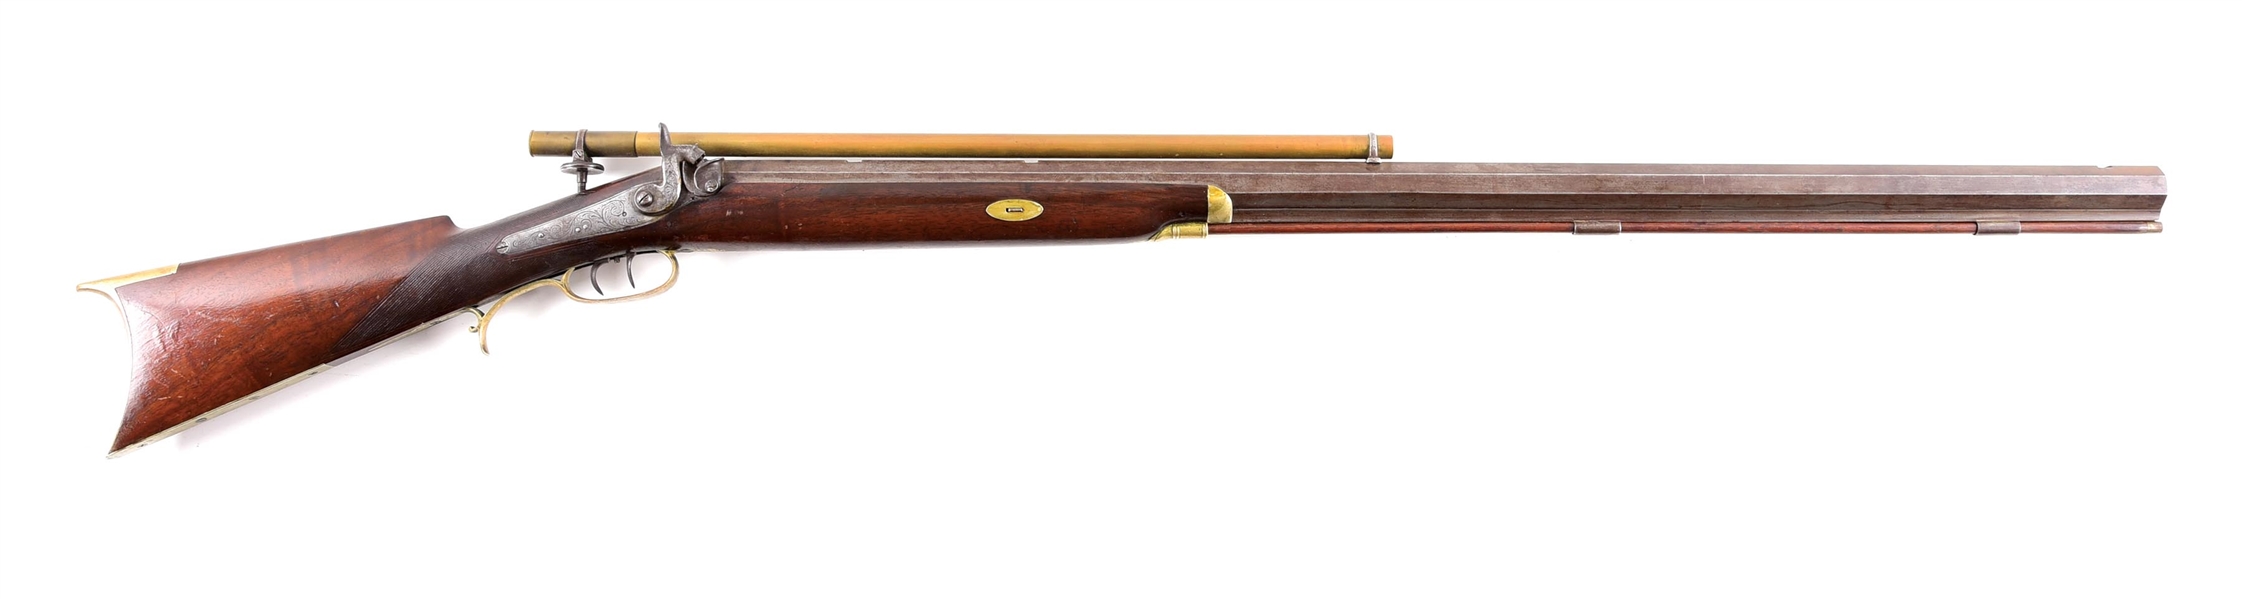 (A) NELSON LEWIS PERCUSSION TARGET RIFLE WITH SCOPE.